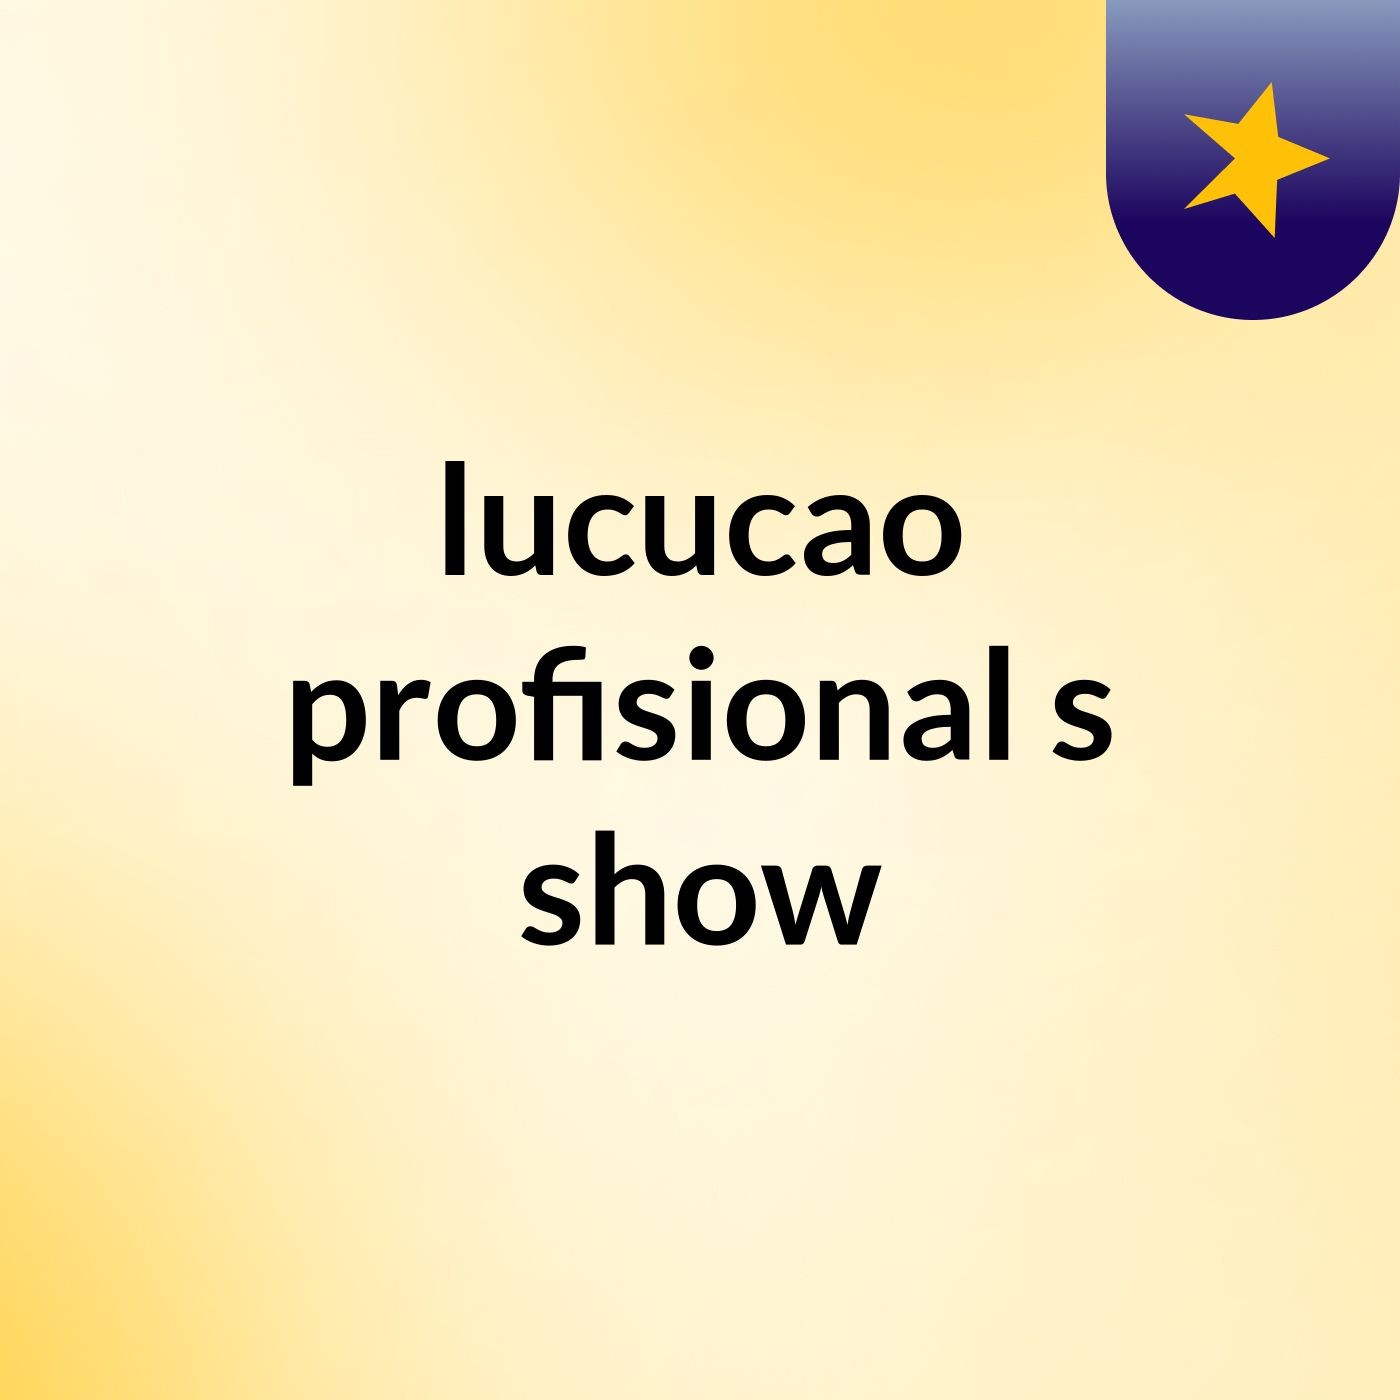 lucucao profisional's show